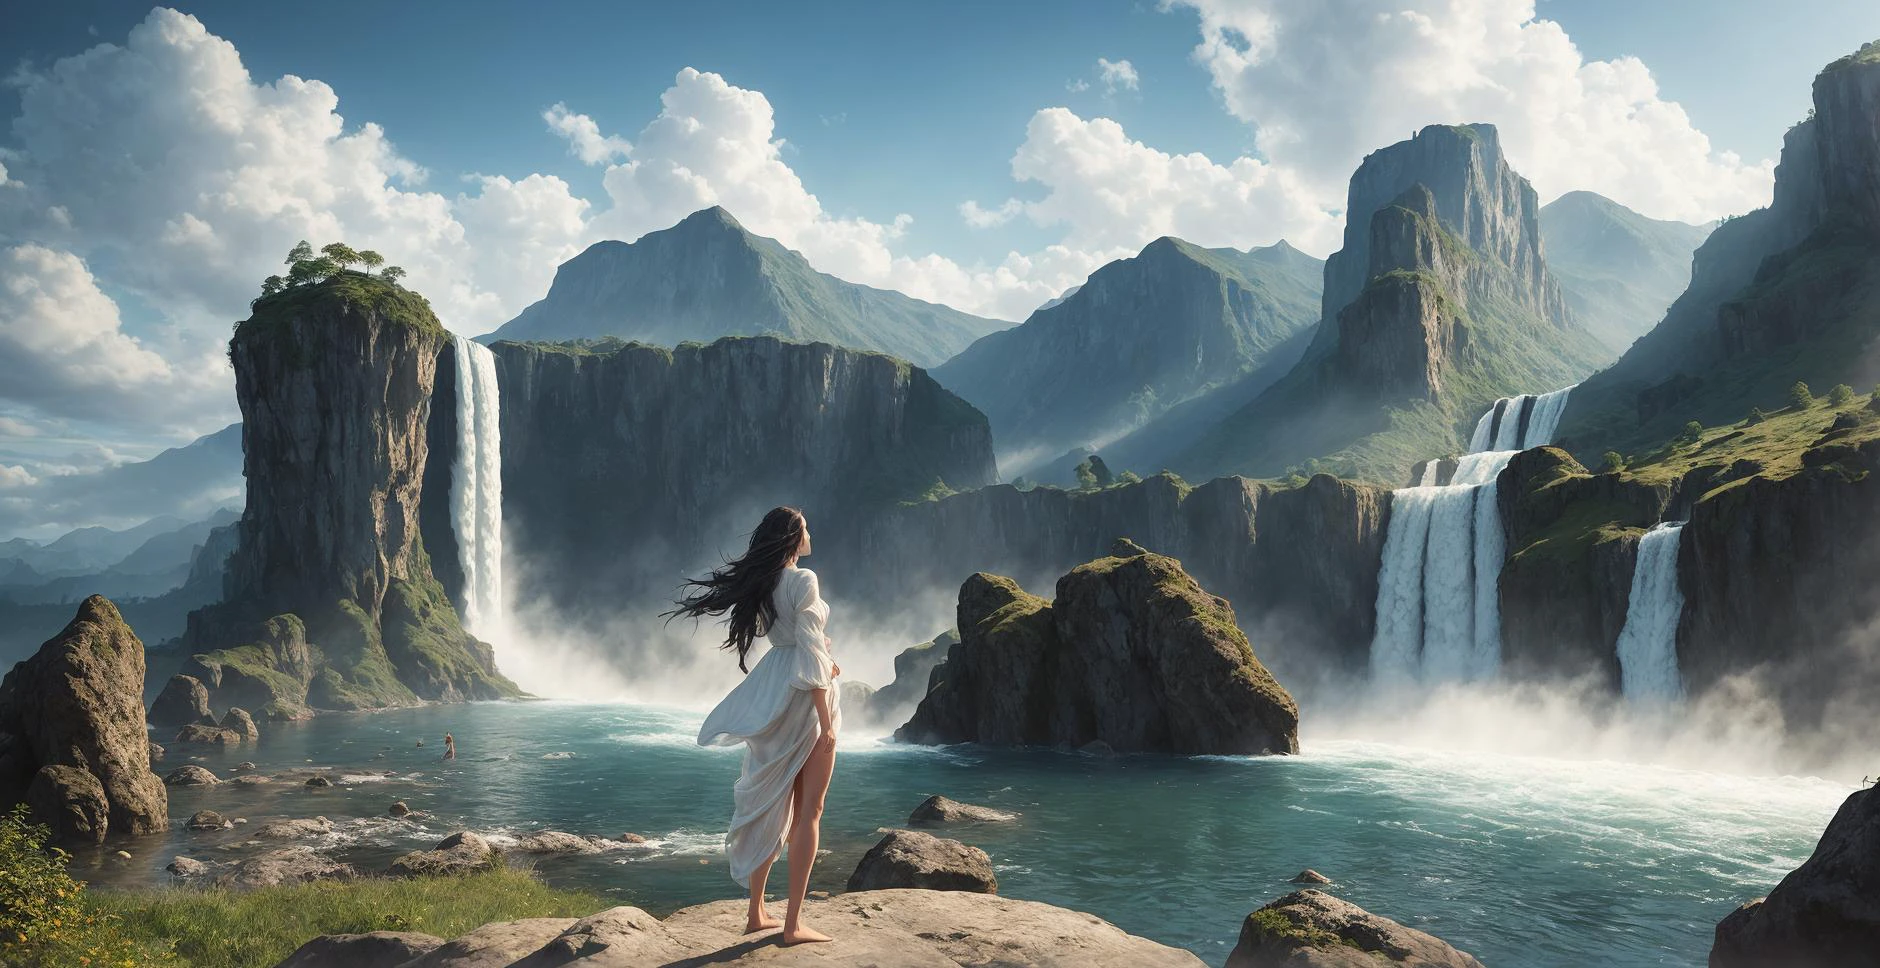 a woman in a 白 dress 立っている on a cliff with a waterfall in the background and a waterfall flowing from her, クリント・シアリー, マジックザギャザリングのアートワーク, 詳細なマットペイント, ファンタジーアート,裸足, 雲, 雲y_空, フローティング_髪, 長さ_髪, black 髪,男_集中, 山, 屋外, 空, 一人で, 立っている, 白_髪, 広い_袖, 風,
高解像度, (フォトリアリズム, 傑作品質, 最高品質),